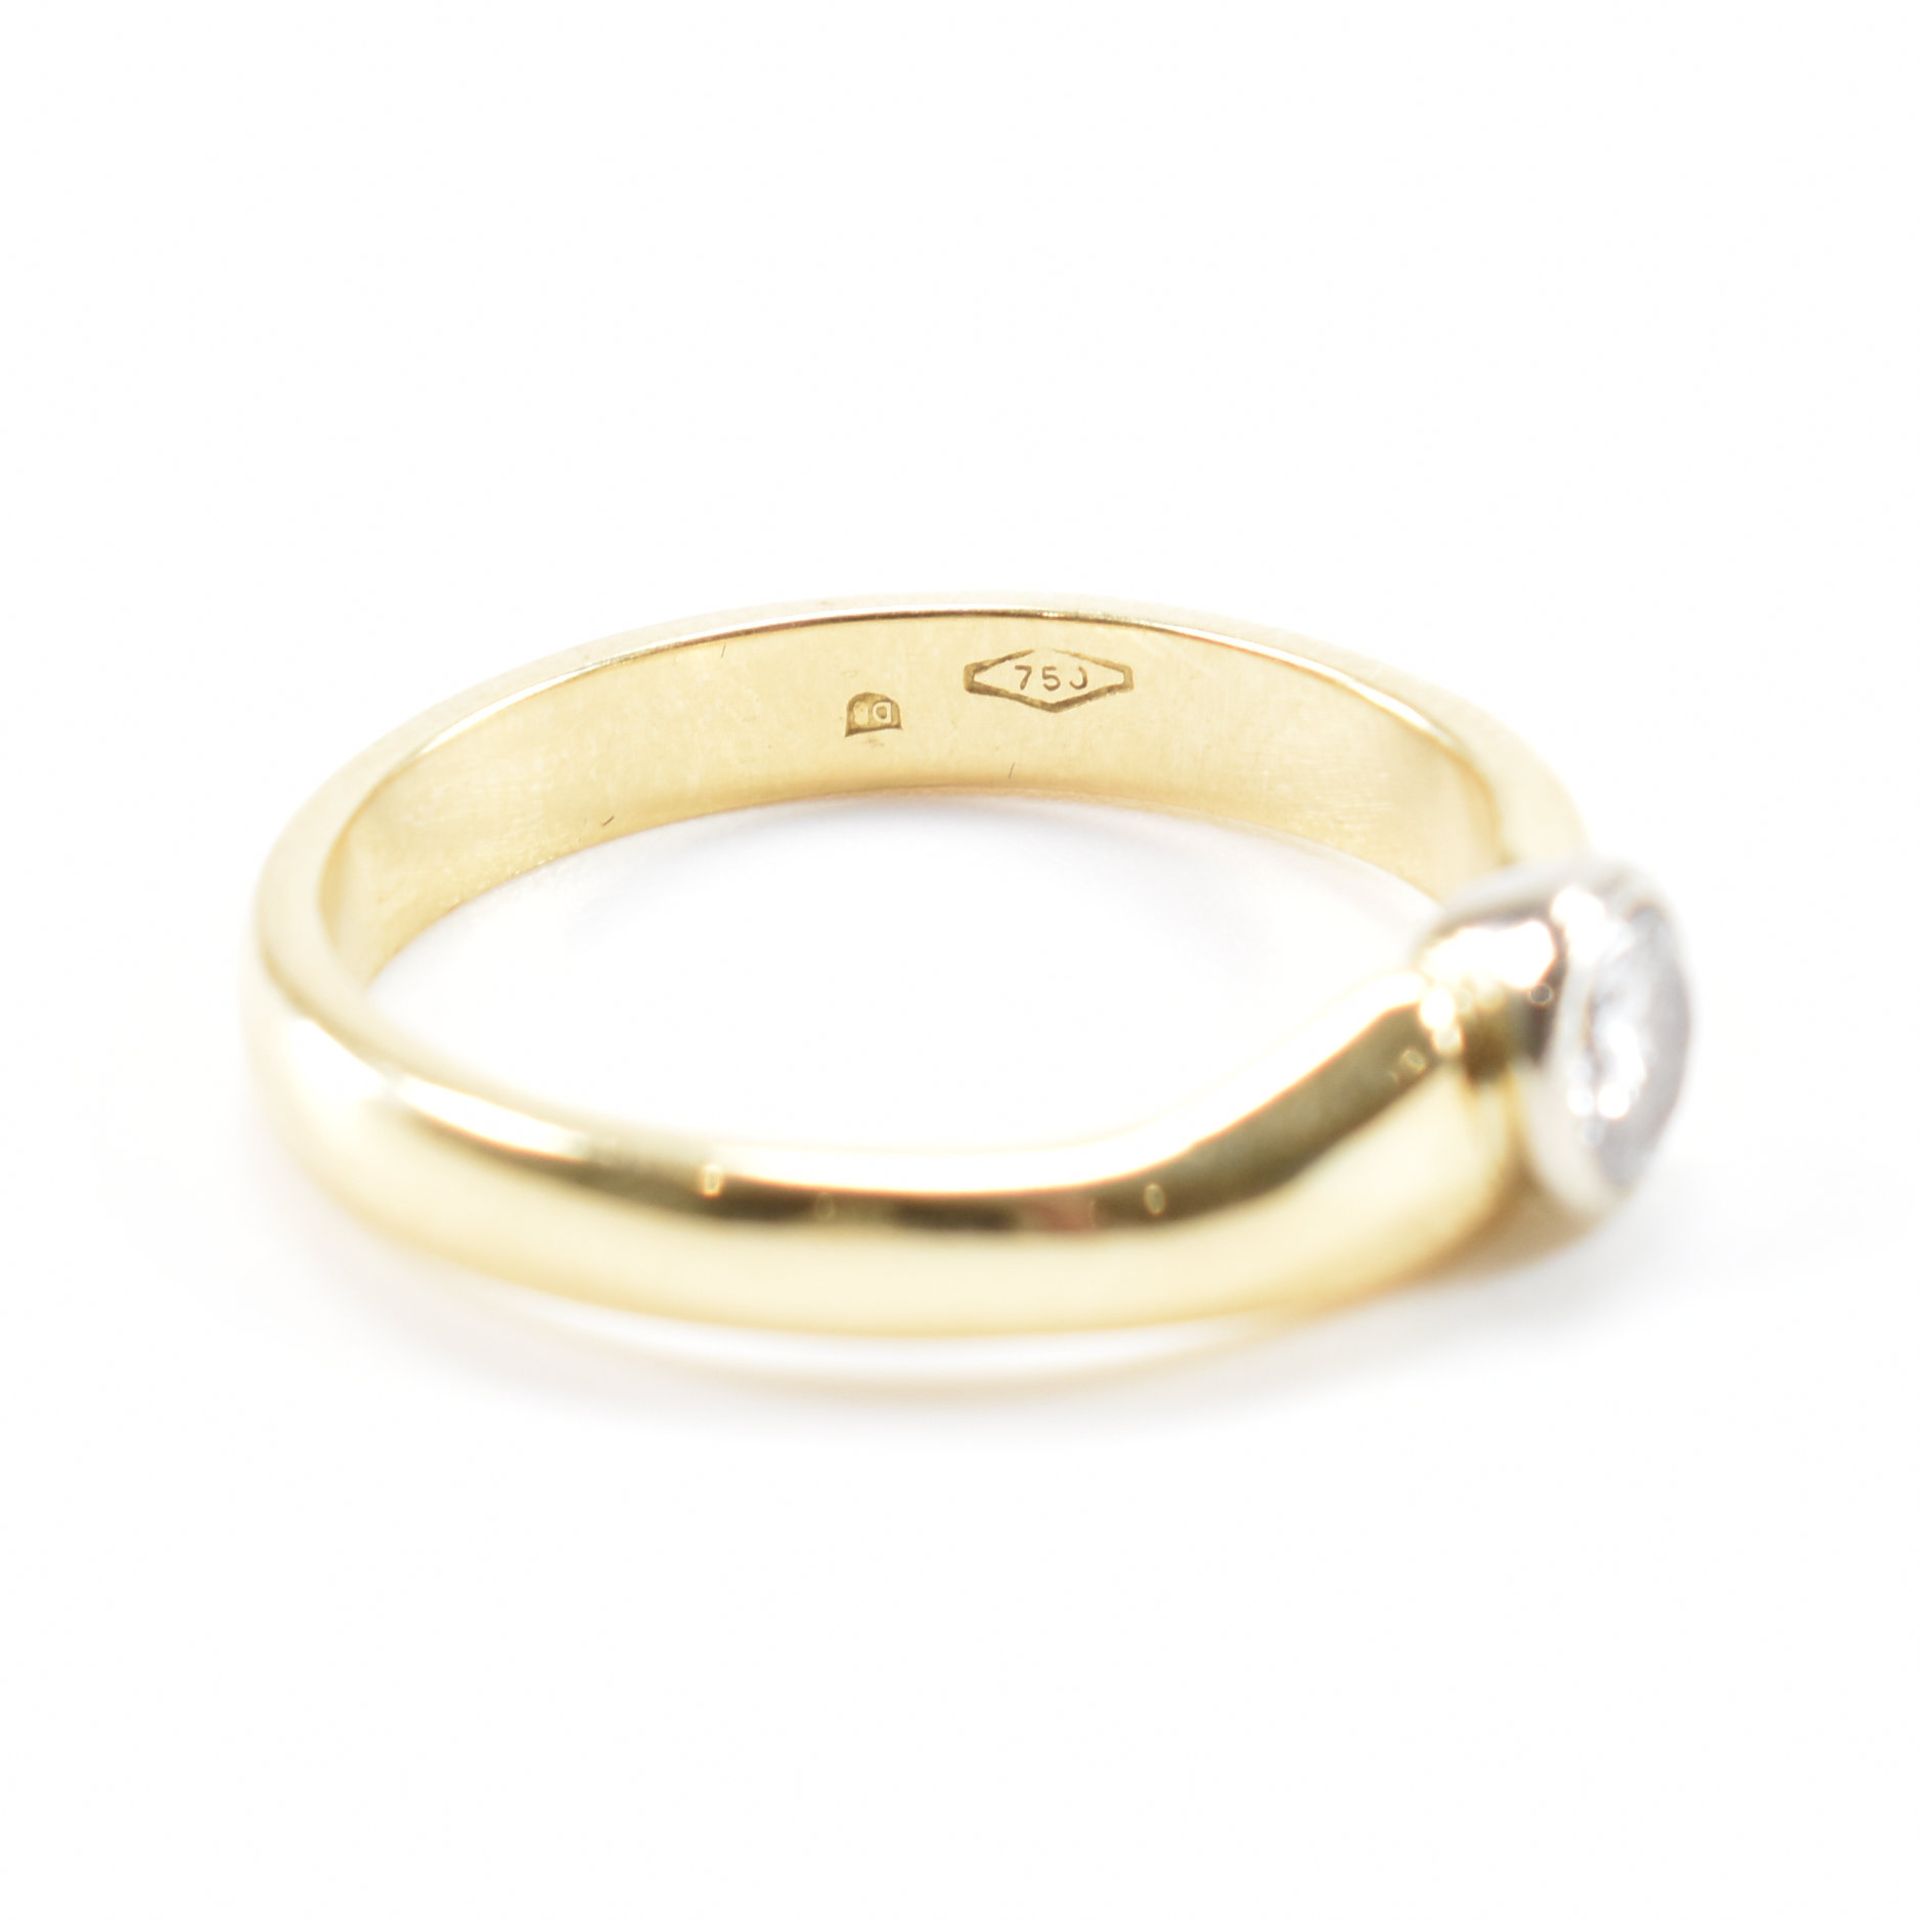 HALLMARKED 18CT GOLD & DIAMOND SOLITAIRE RING - Image 7 of 8